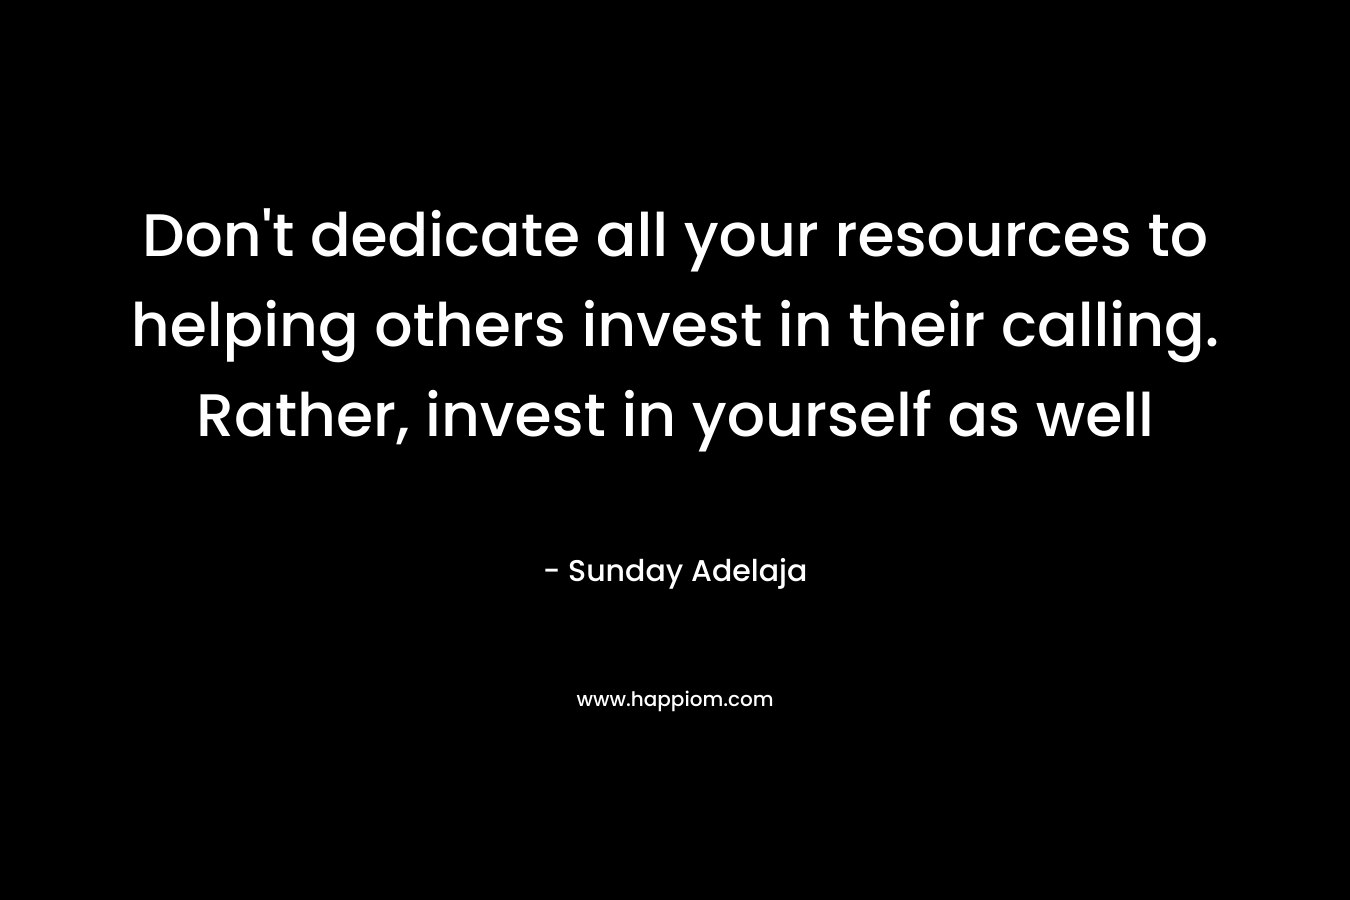 Don’t dedicate all your resources to helping others invest in their calling. Rather, invest in yourself as well – Sunday Adelaja